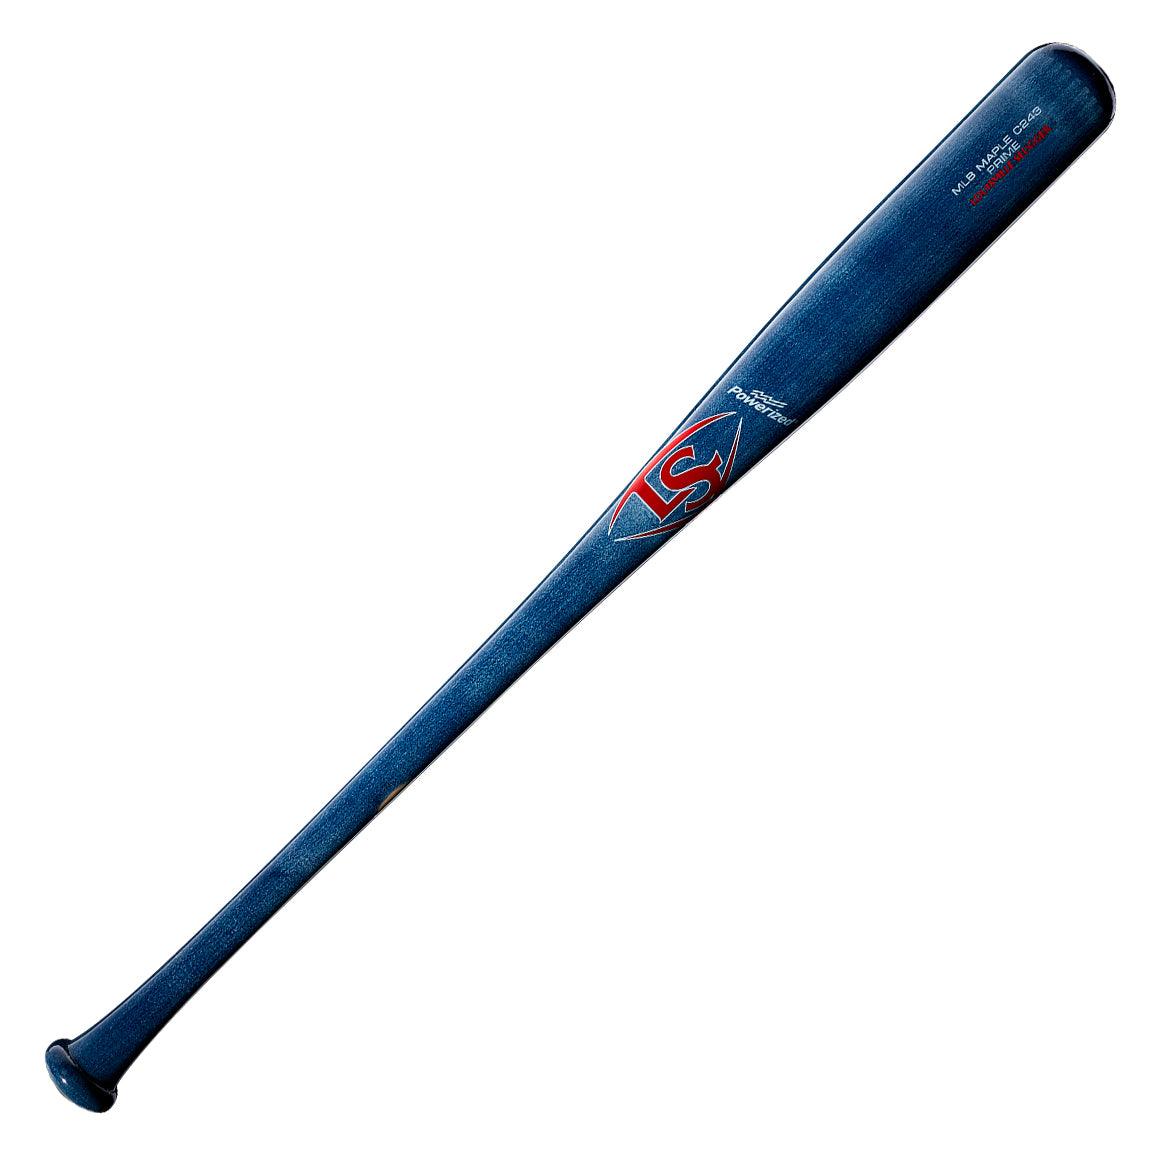 MLB Prime Maple Big Blue - Sports Excellence